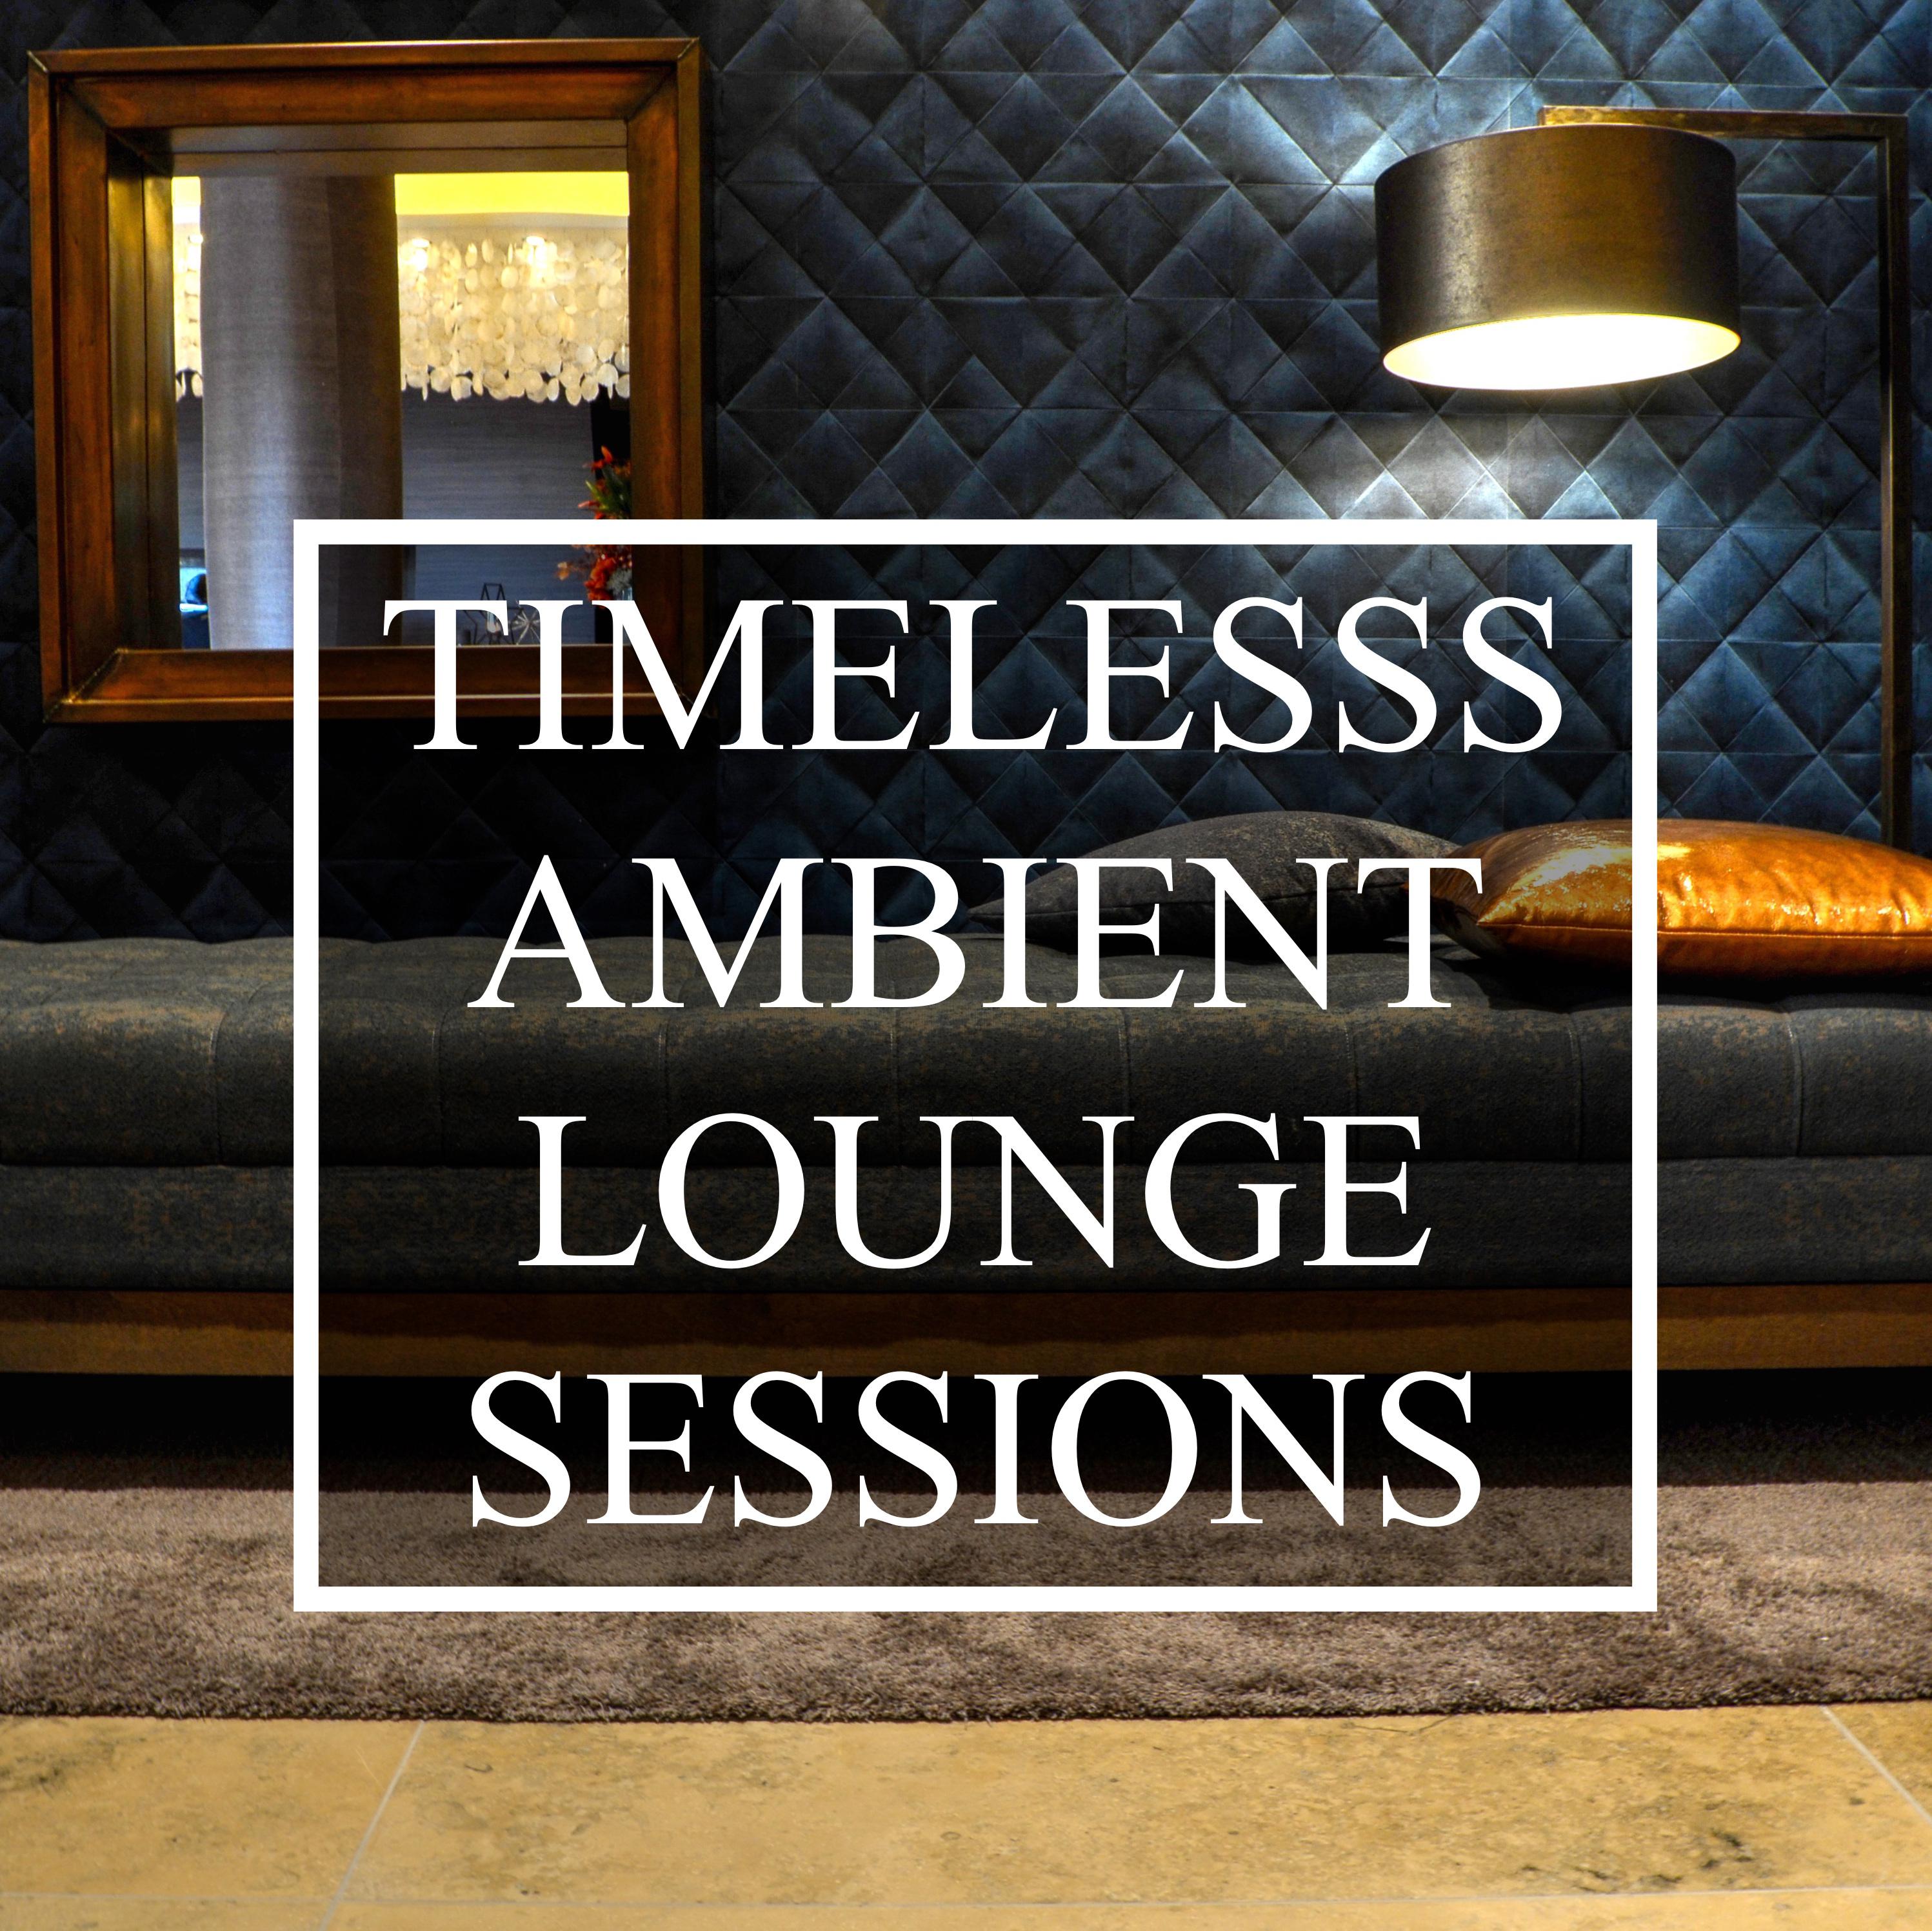 Timeless Ambient/Lounge Sessions - 20 Underground Chillout Tracks to Relax & Unwind, for Total Stress Relief,  Complete Study Focus, Good Vibes and a Great Ambience